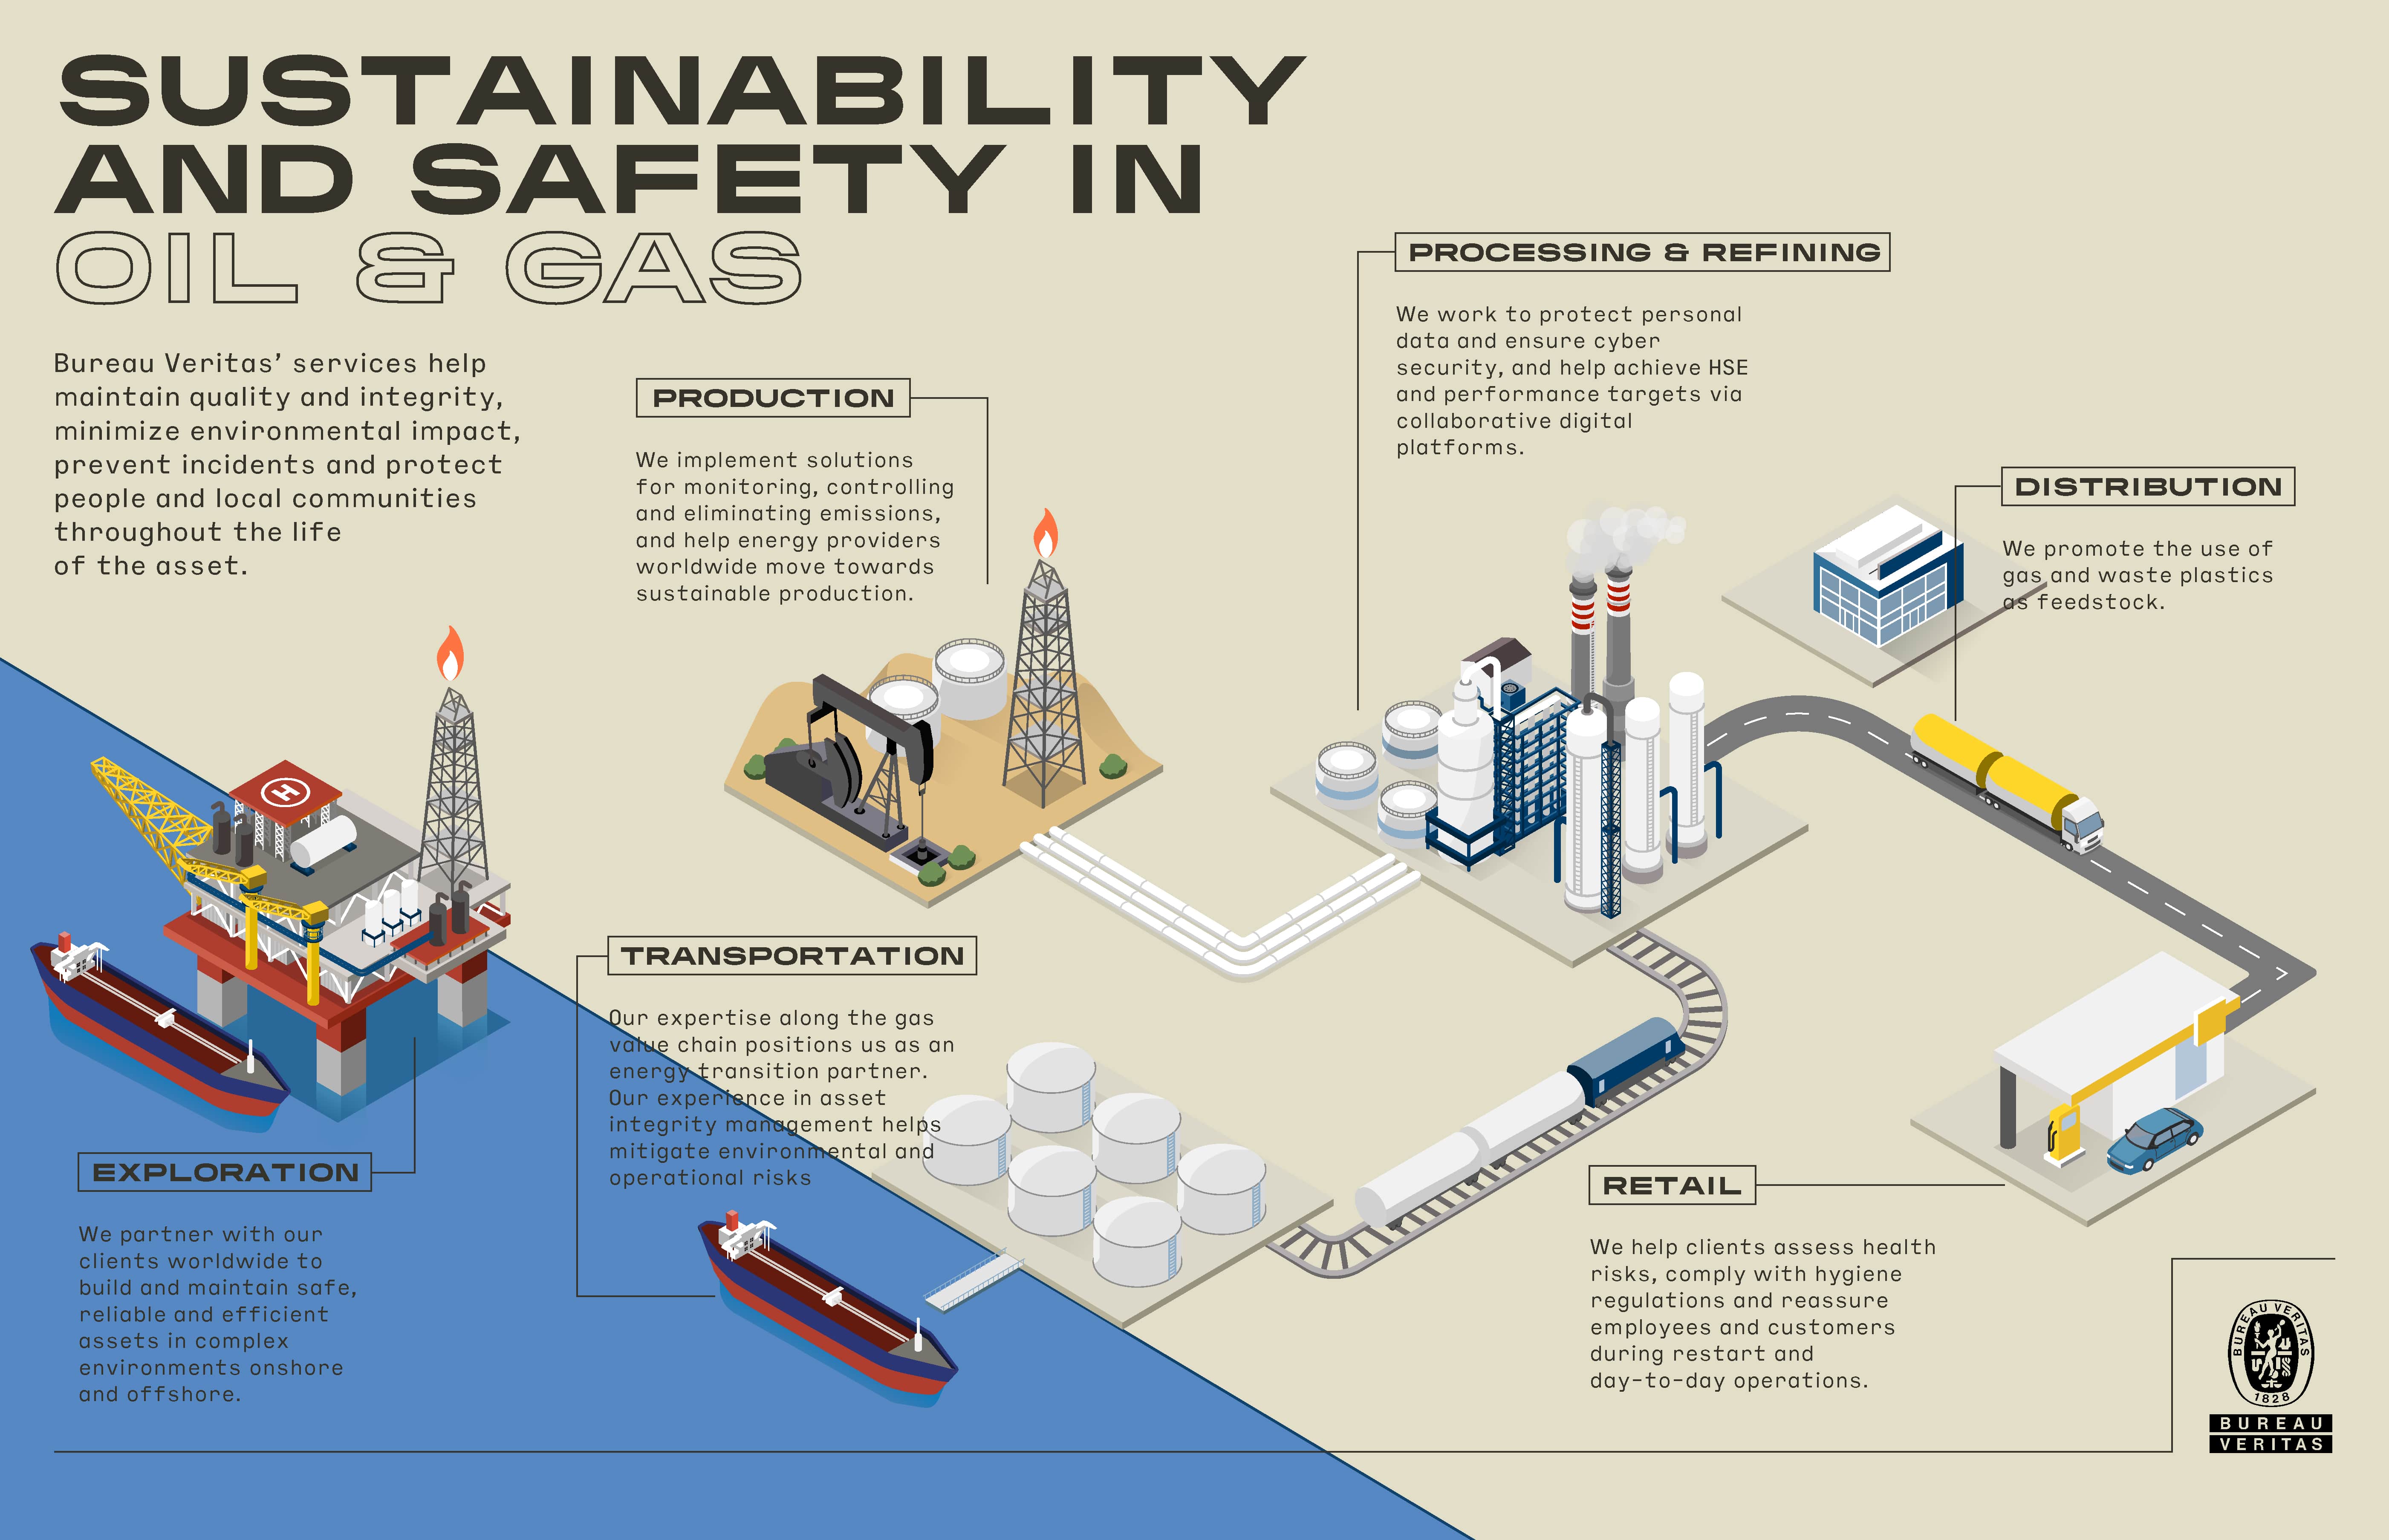 BV-OilGas-01_Sustainability-and-safety